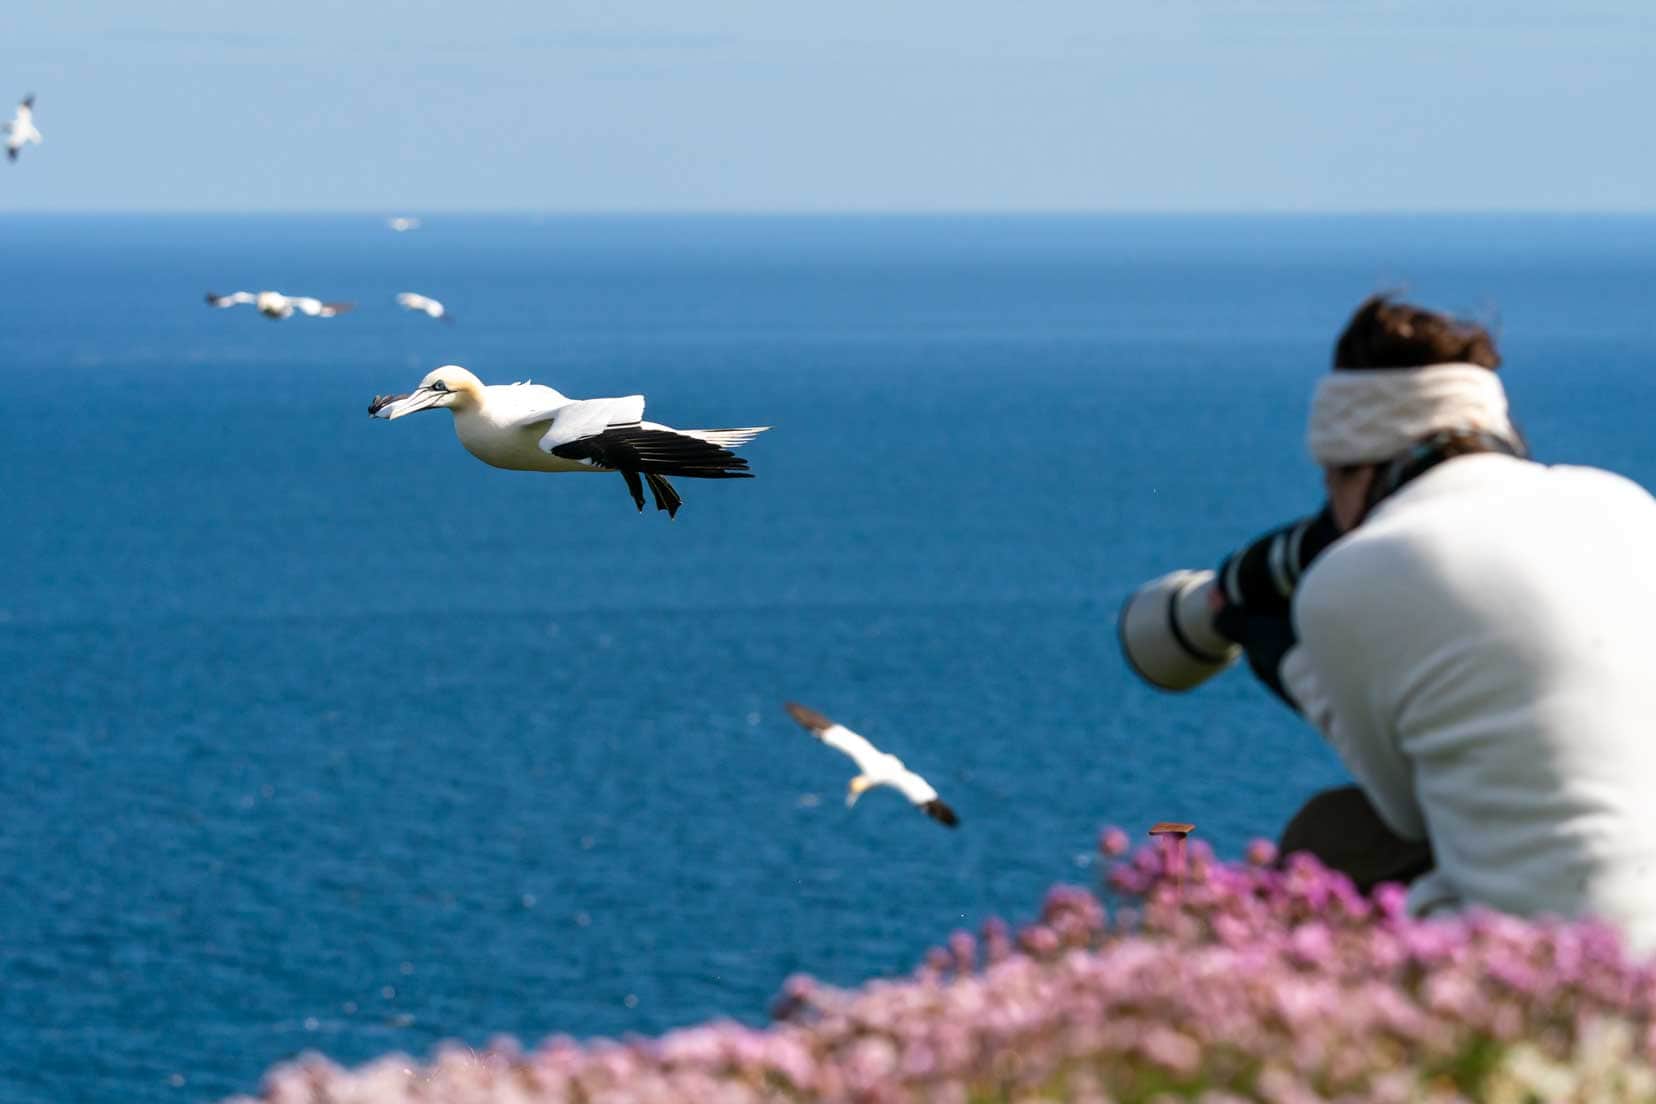 Troup Head photo opportunity - taking photos of the gannets in Aberdeenshire